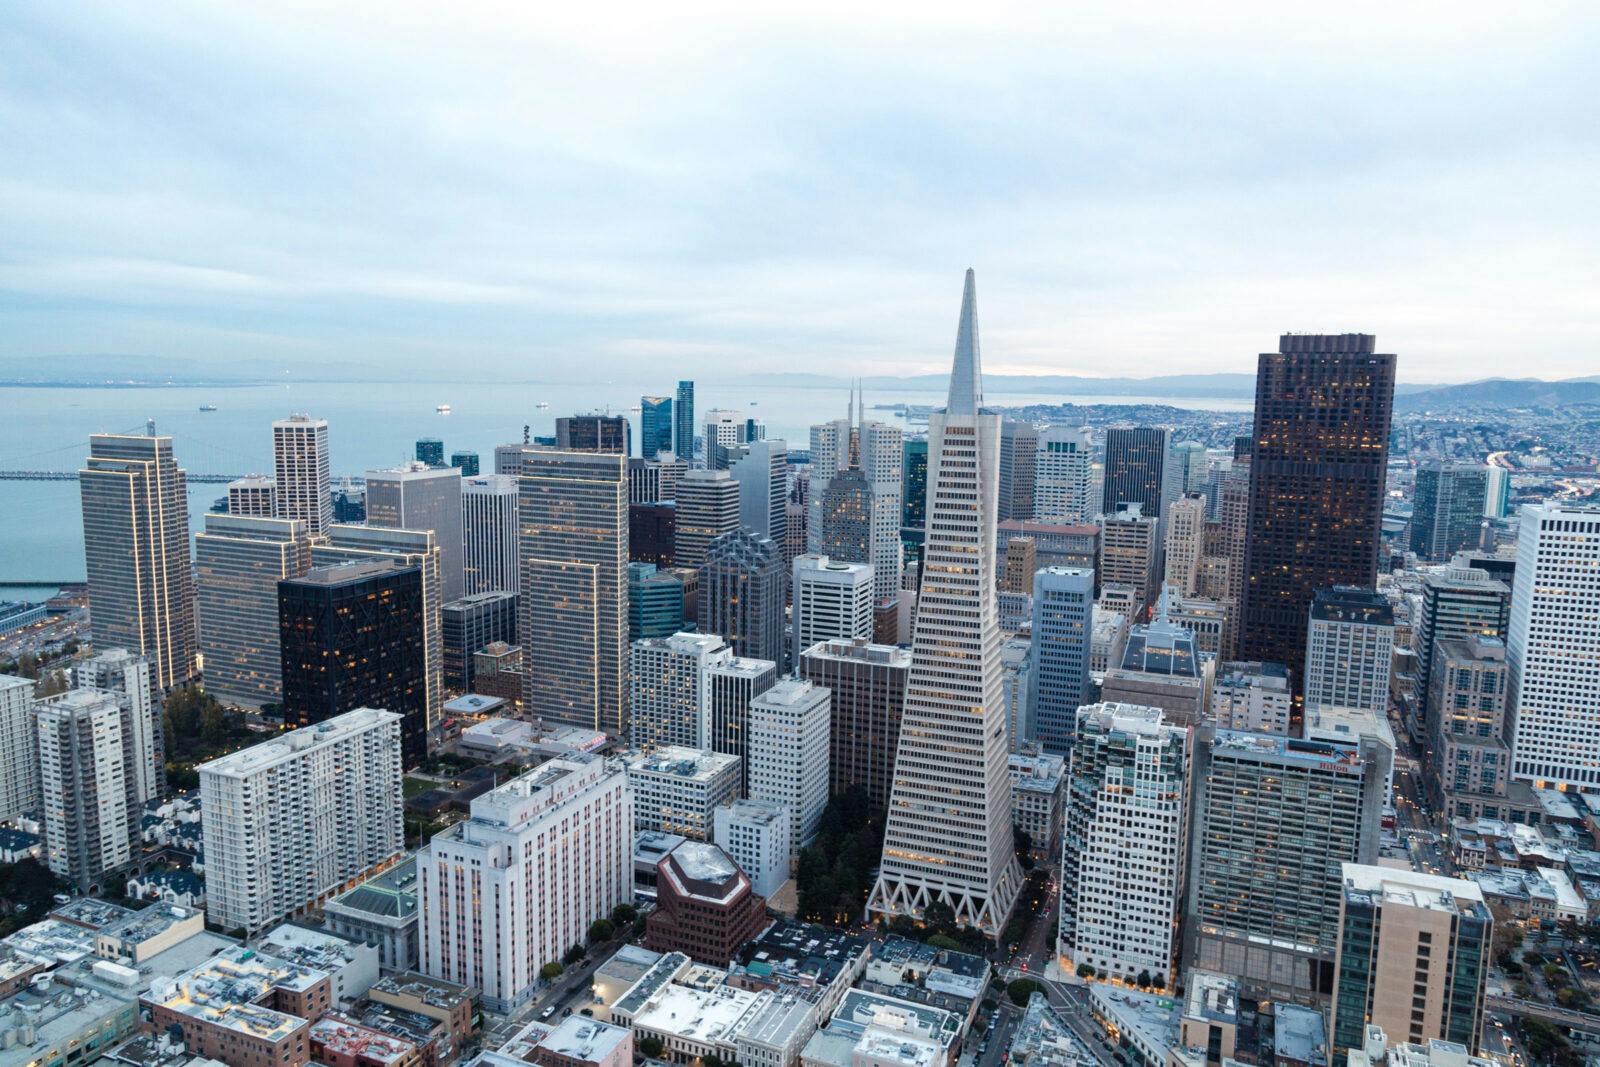 An aerial view of the skyline of San Francisco. The most prominent building in the image is the Transamerica Pyramid, a 853-foot (260 m) skyscraper that was completed in 1972. The Transamerica Pyramid is known for its distinctive triangular shape, which has become an iconic landmark of San Francisco.